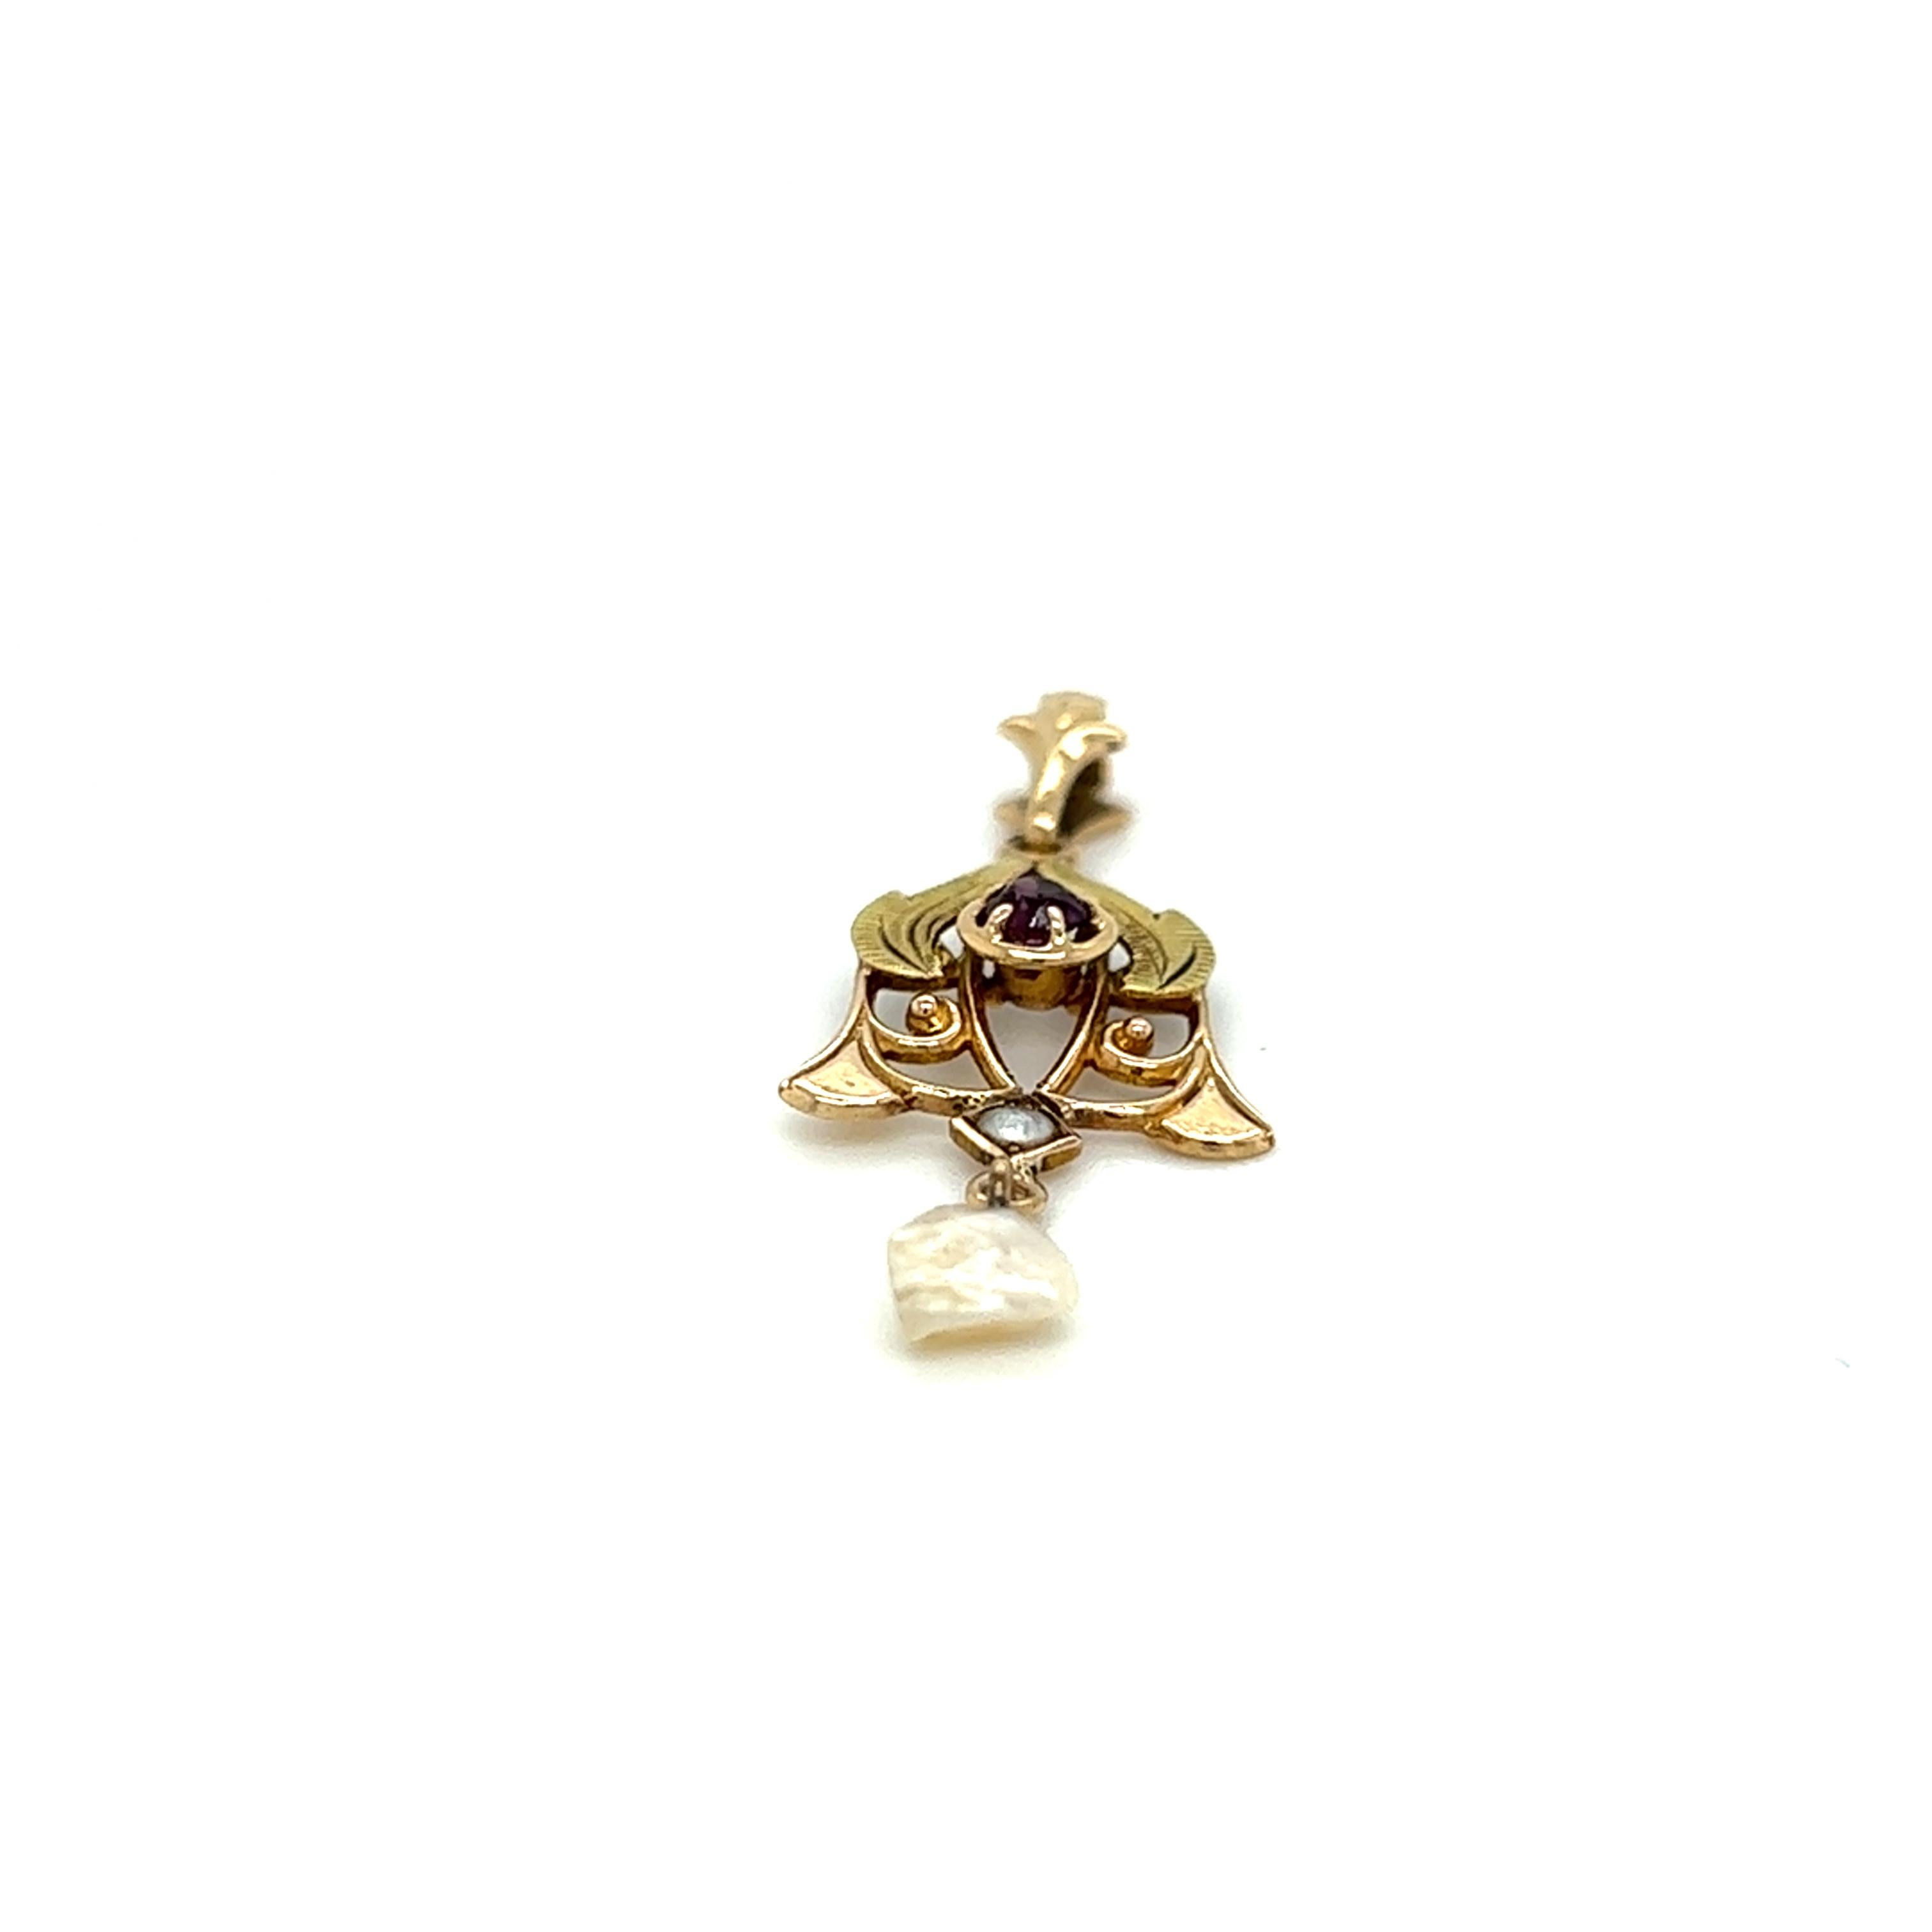 One 10 karat yellow gold Art Nouveau pendant, set with one 3mm round pink sapphire, one seed pearl, and one freshwater Mississippi river Pearl.  The pendant measures 1.25 inches long and weighs 0.9 grams total weight.  
